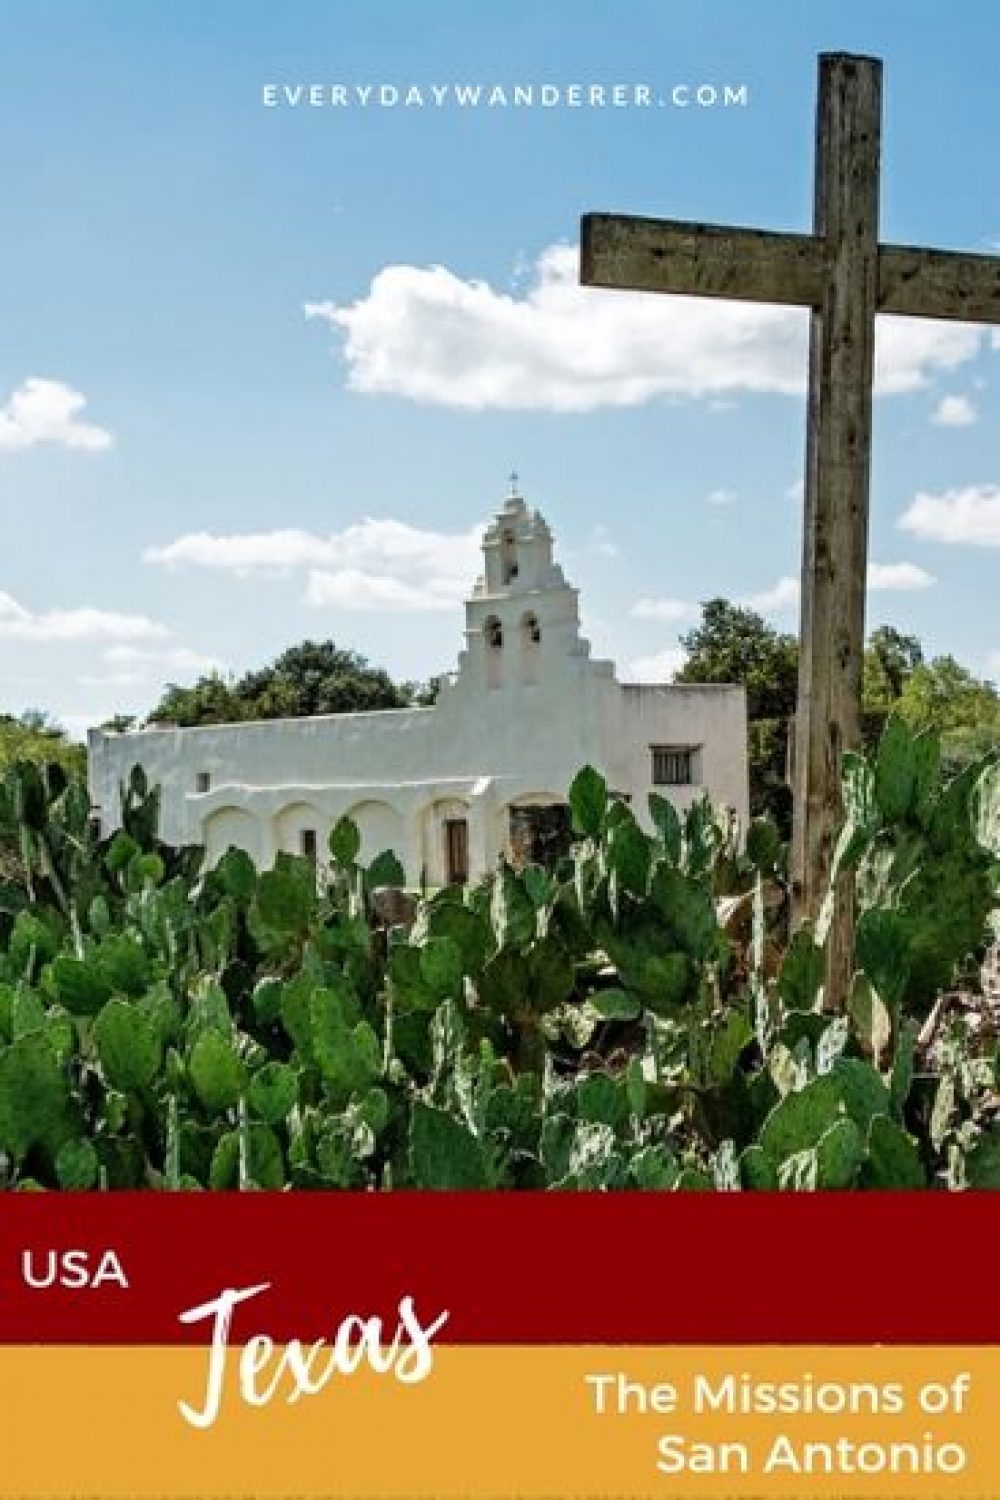 How to see all five San Antonio Missions in San Antonio Texas. In addition to the Alamo, there are four other San Antonio Texas missions in the San Antonio Missions National Park. Bike the San Antonio Missions Trail as a San Antonio things to do on your Texas vacation. #sanantonio #texas #US #USA #travel